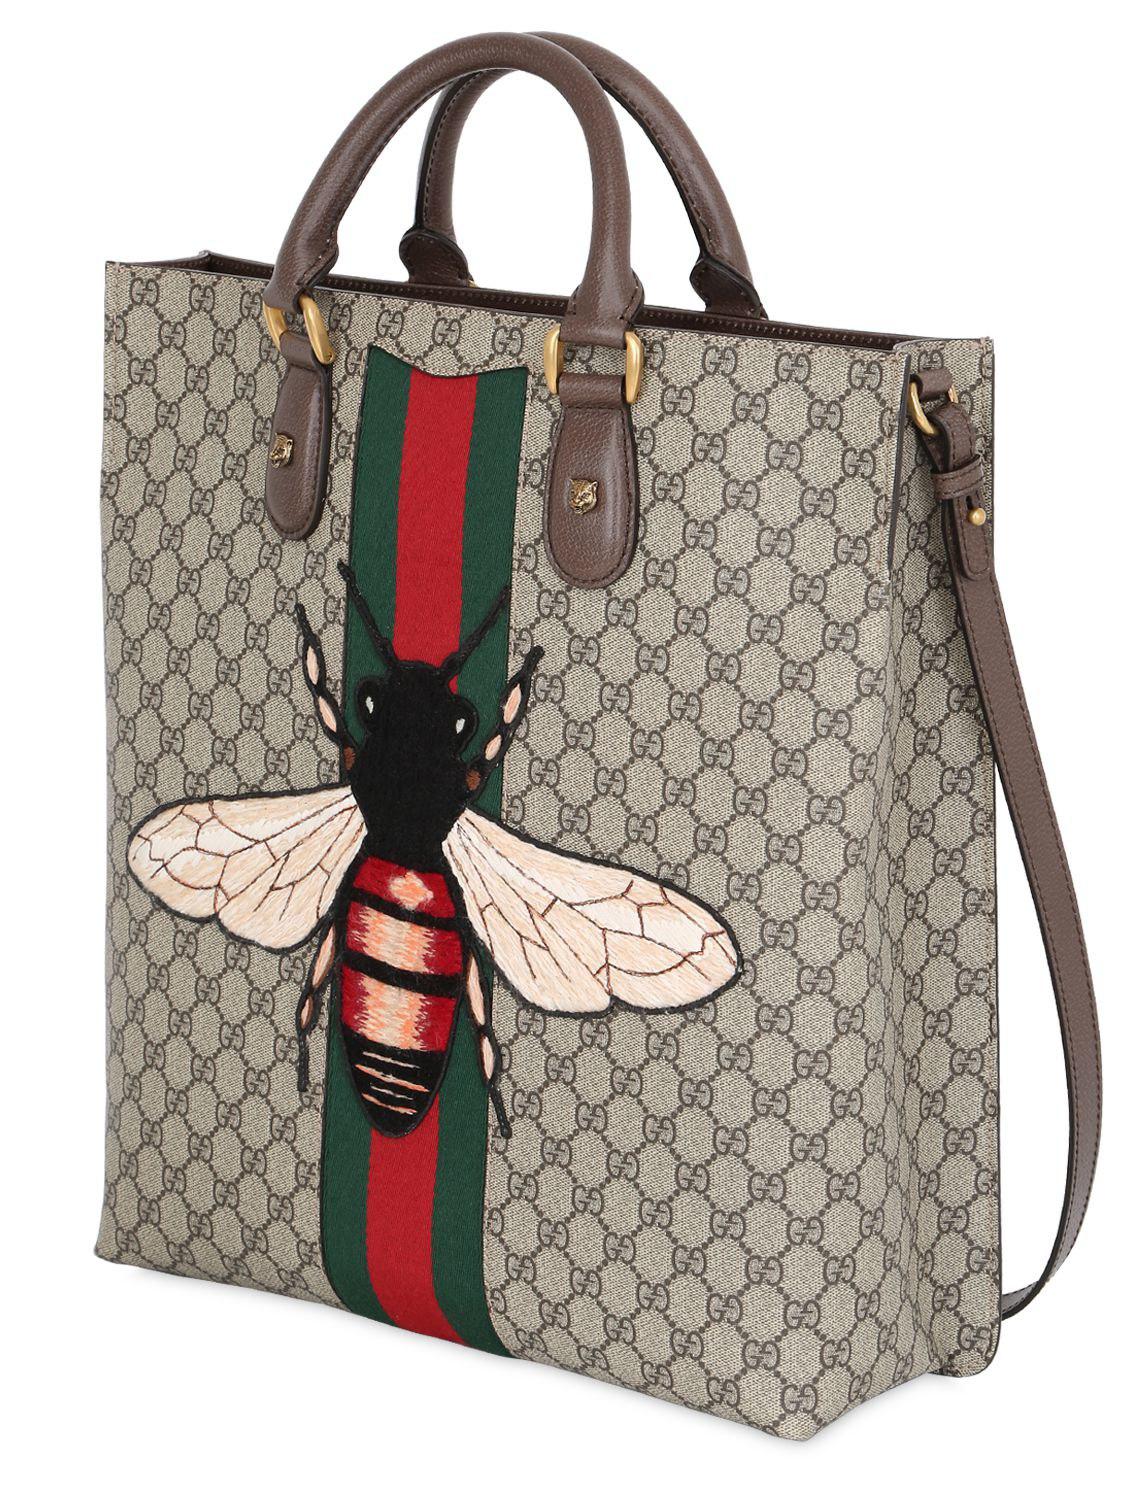 Lyst - Gucci Bee Patch Gg Supreme Tote Bag in Natural